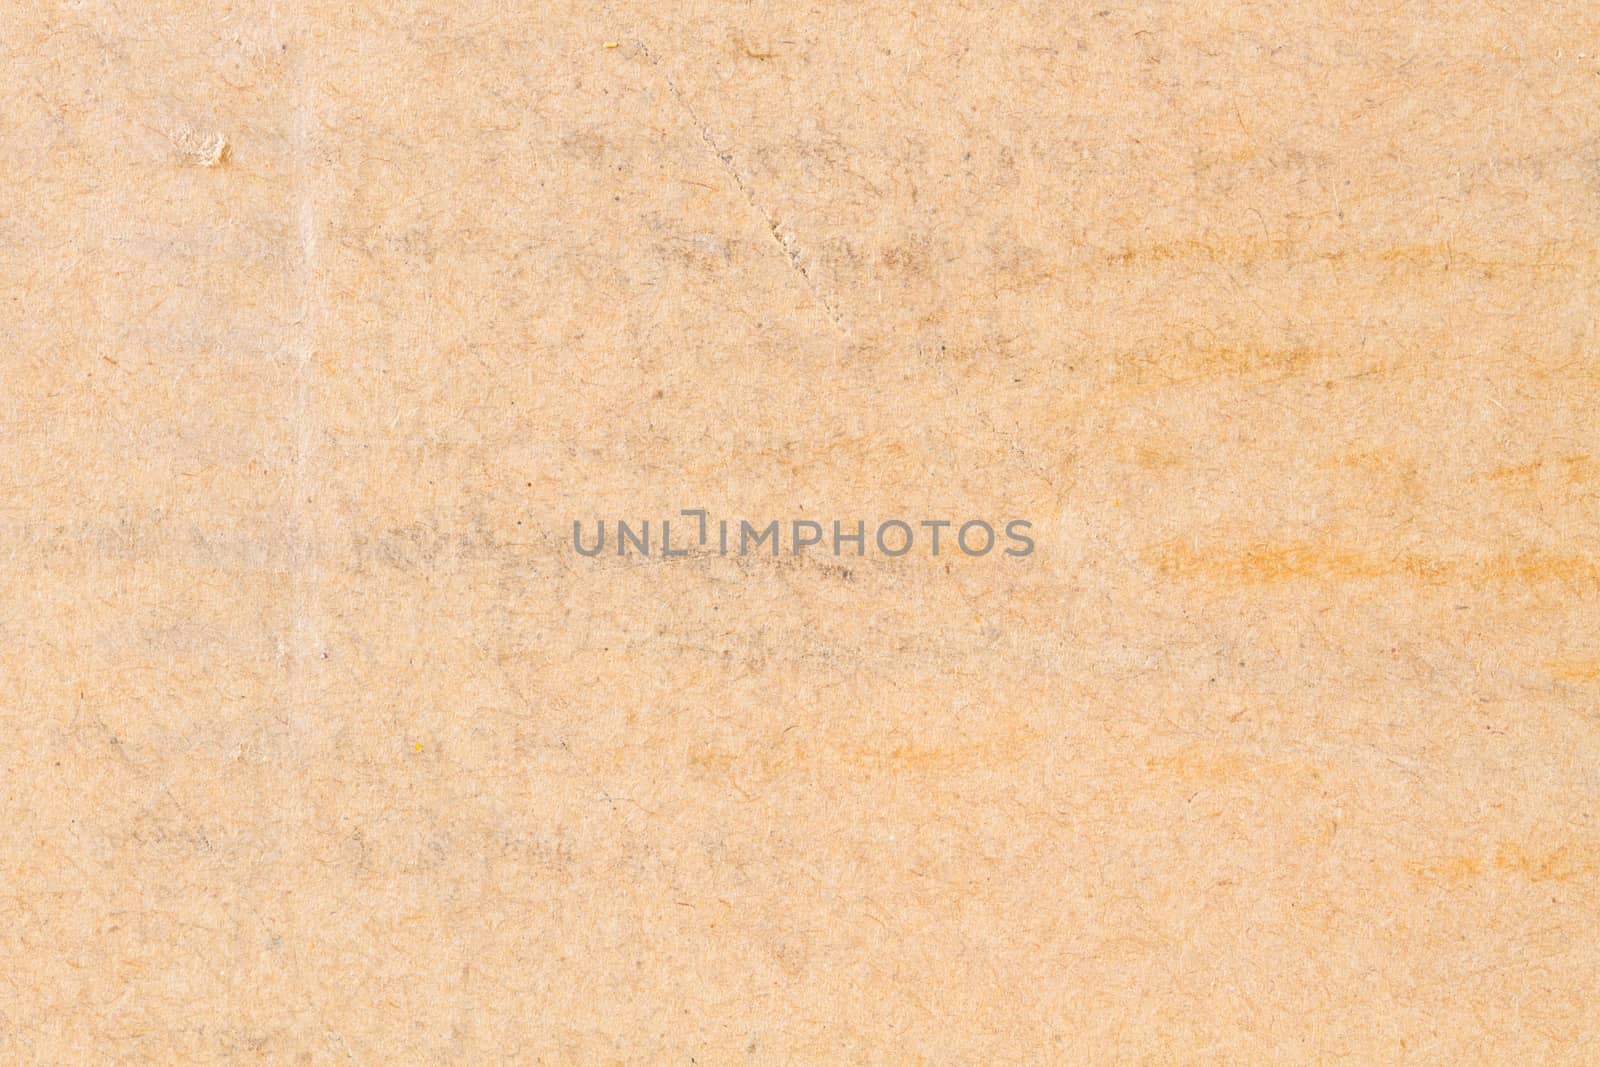 cardboard and carton textures for backgrounds by a3701027